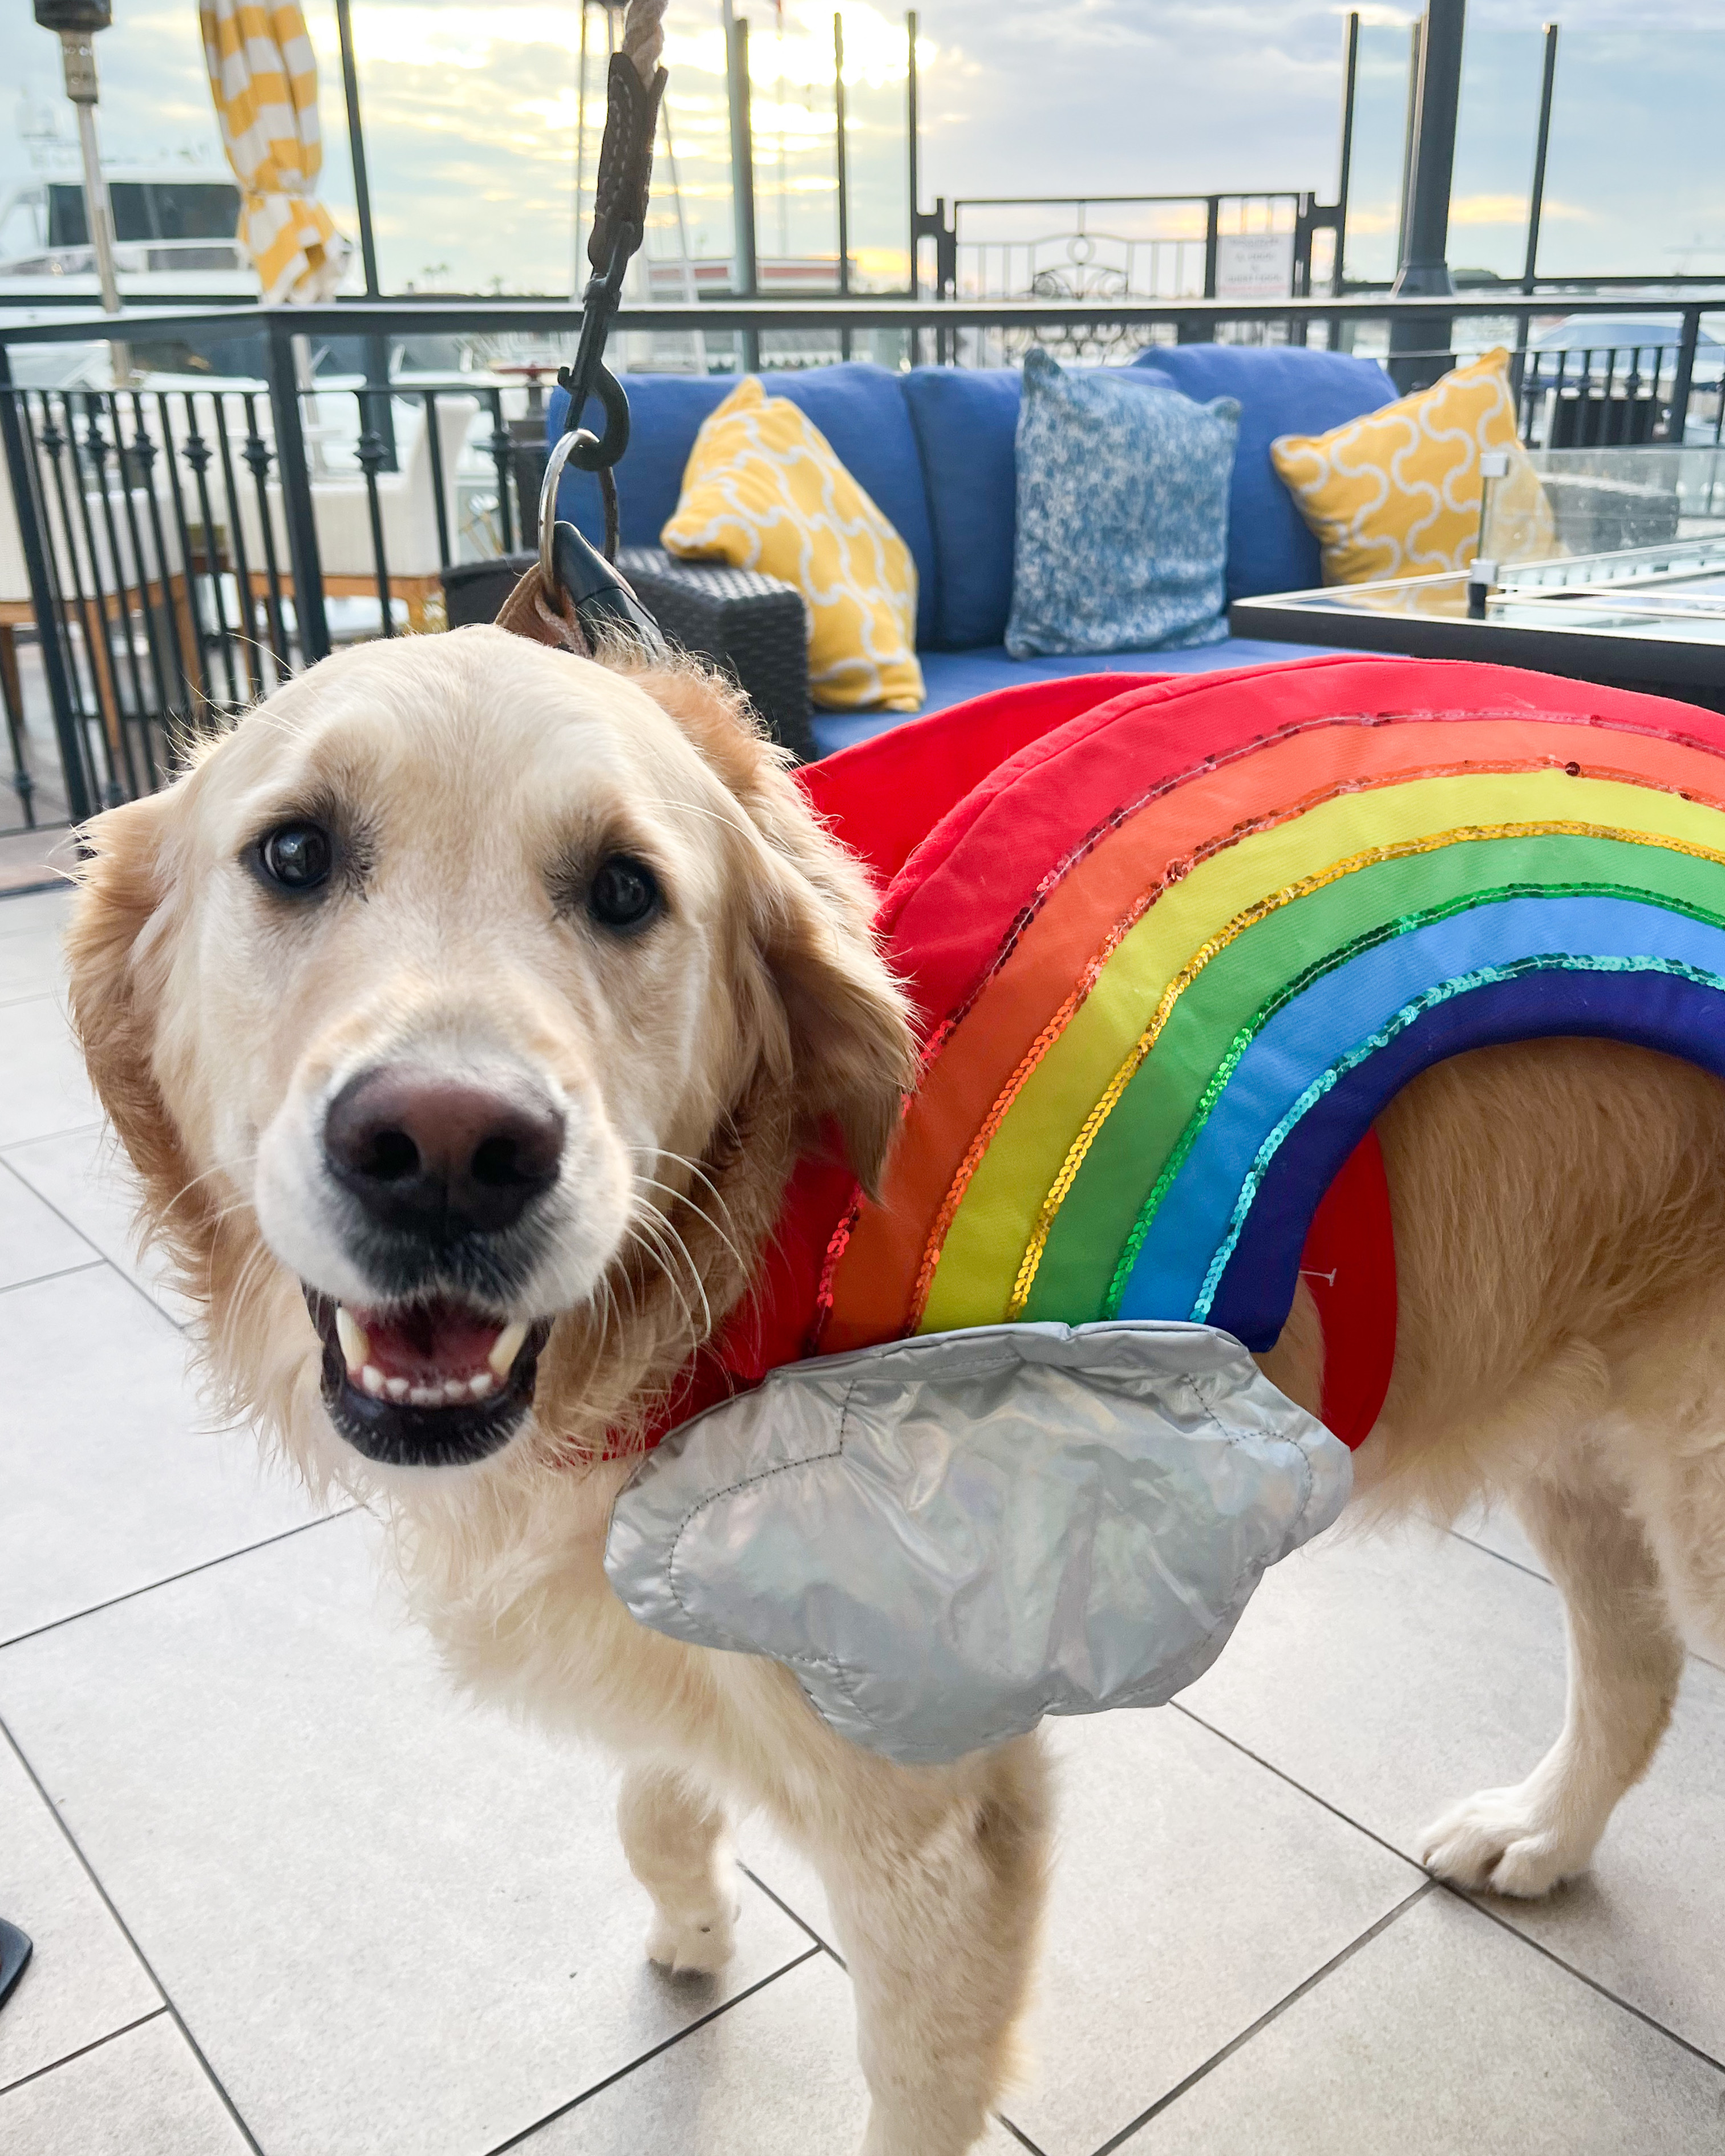 A dog in a rainbow outfit at our hotel near fashion island